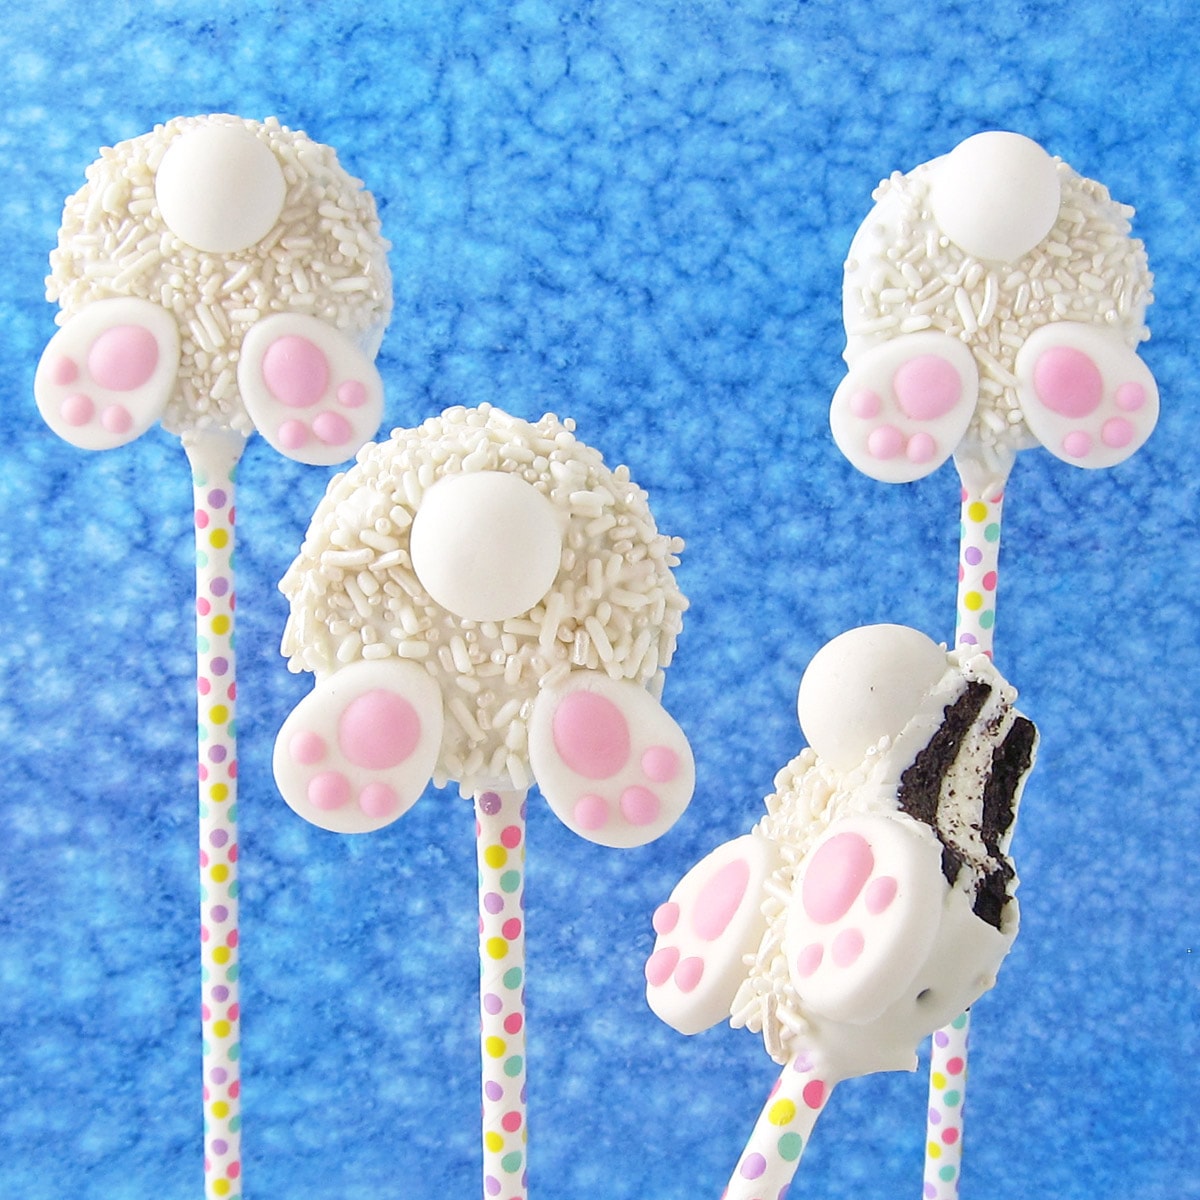 bunny butt cookies made with white chocolate-dipped OREO Cookies, white sprinkles, candy bunny feet and tails.